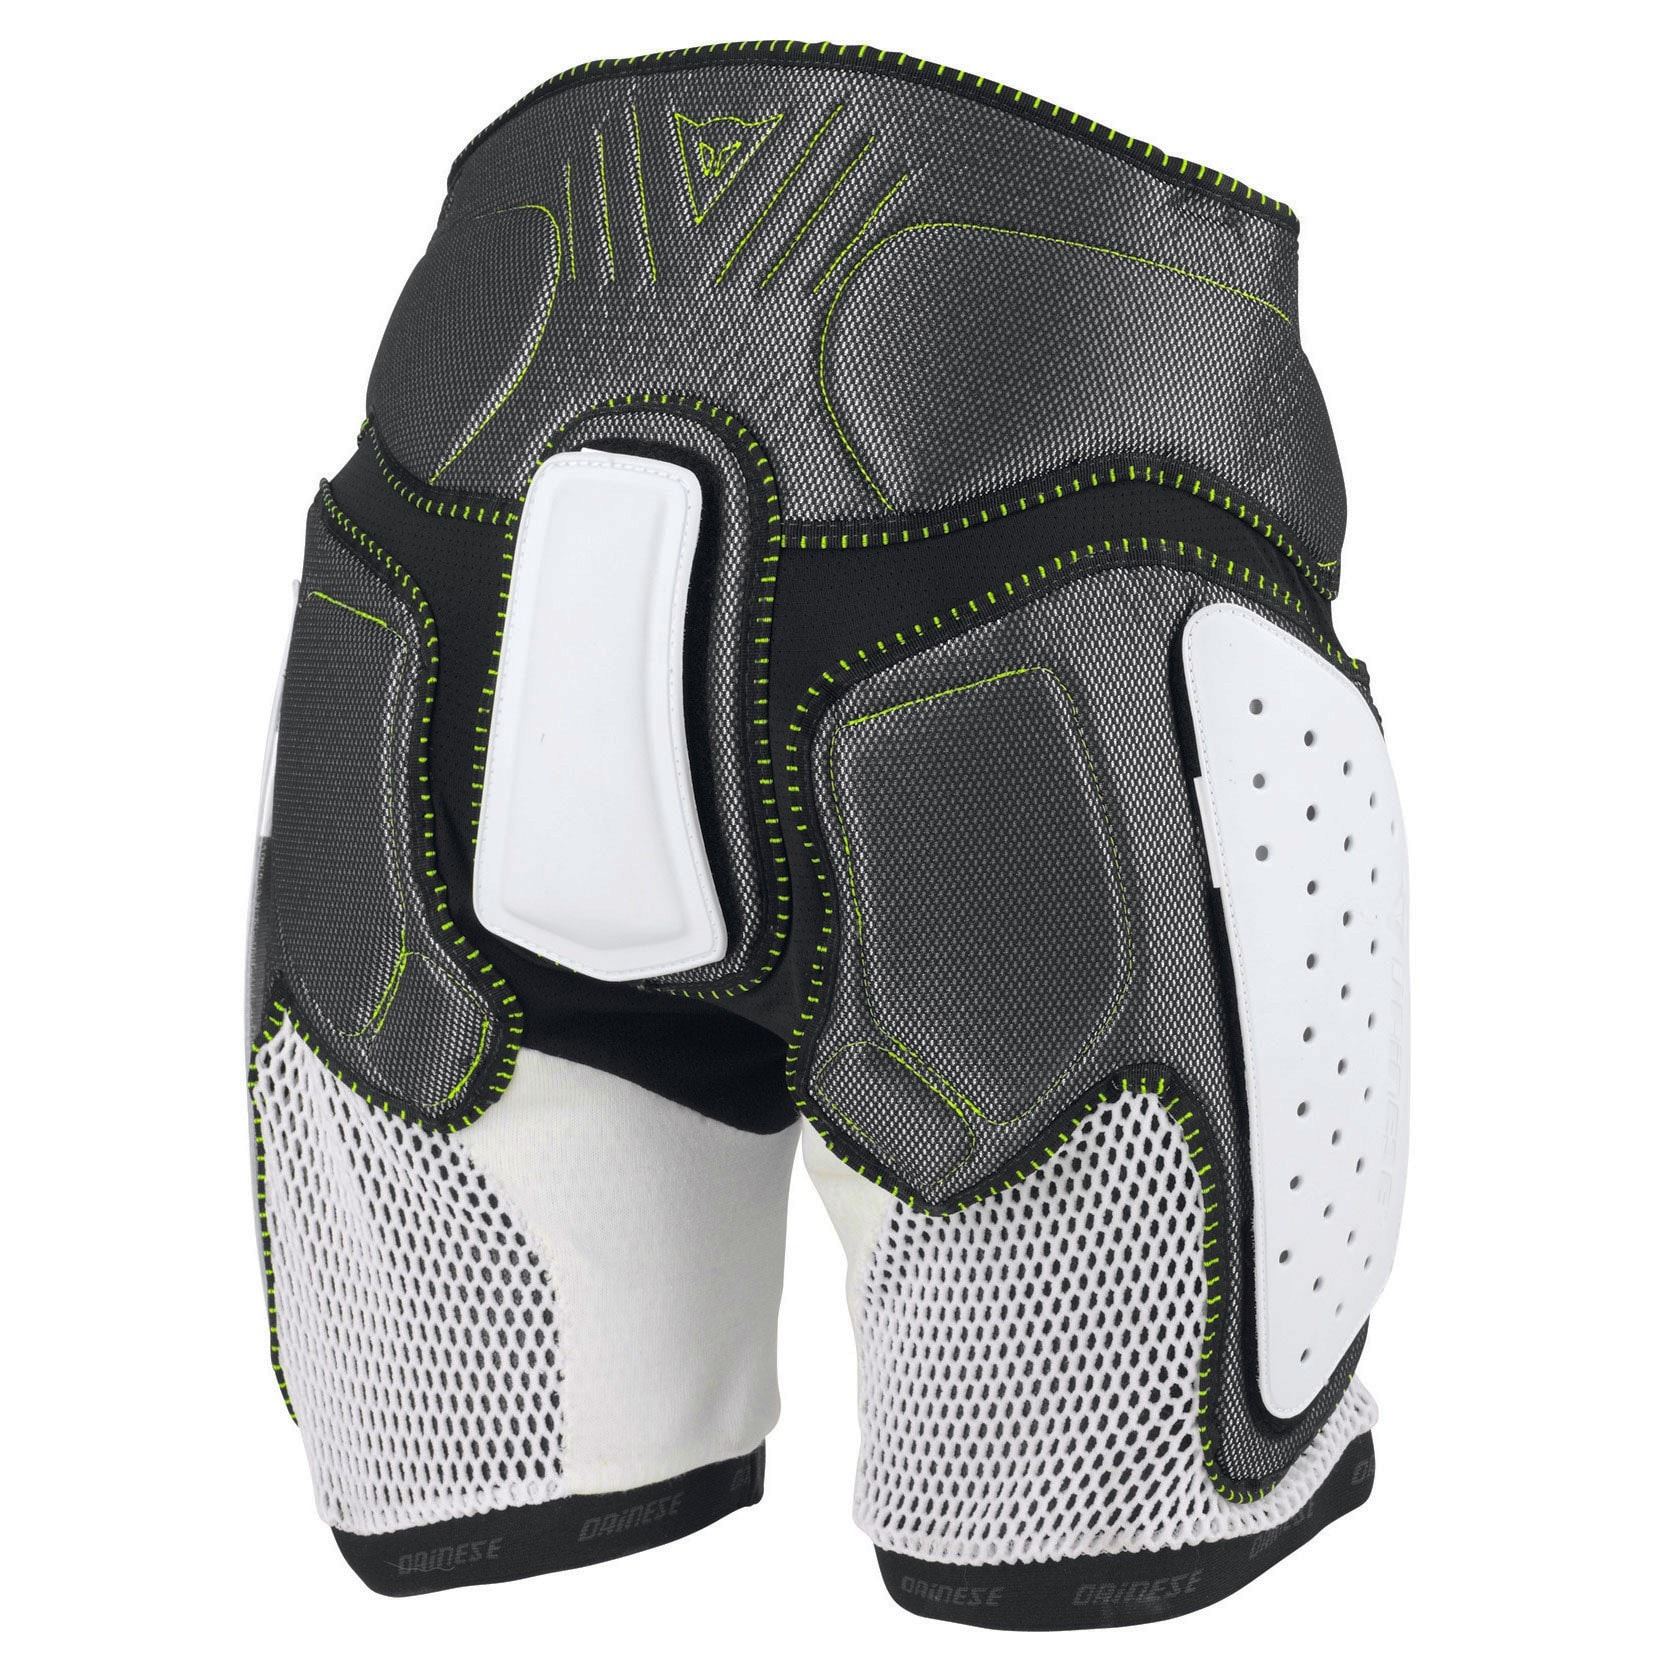 Short protectors Dainese Action Short Protection Evo black/white